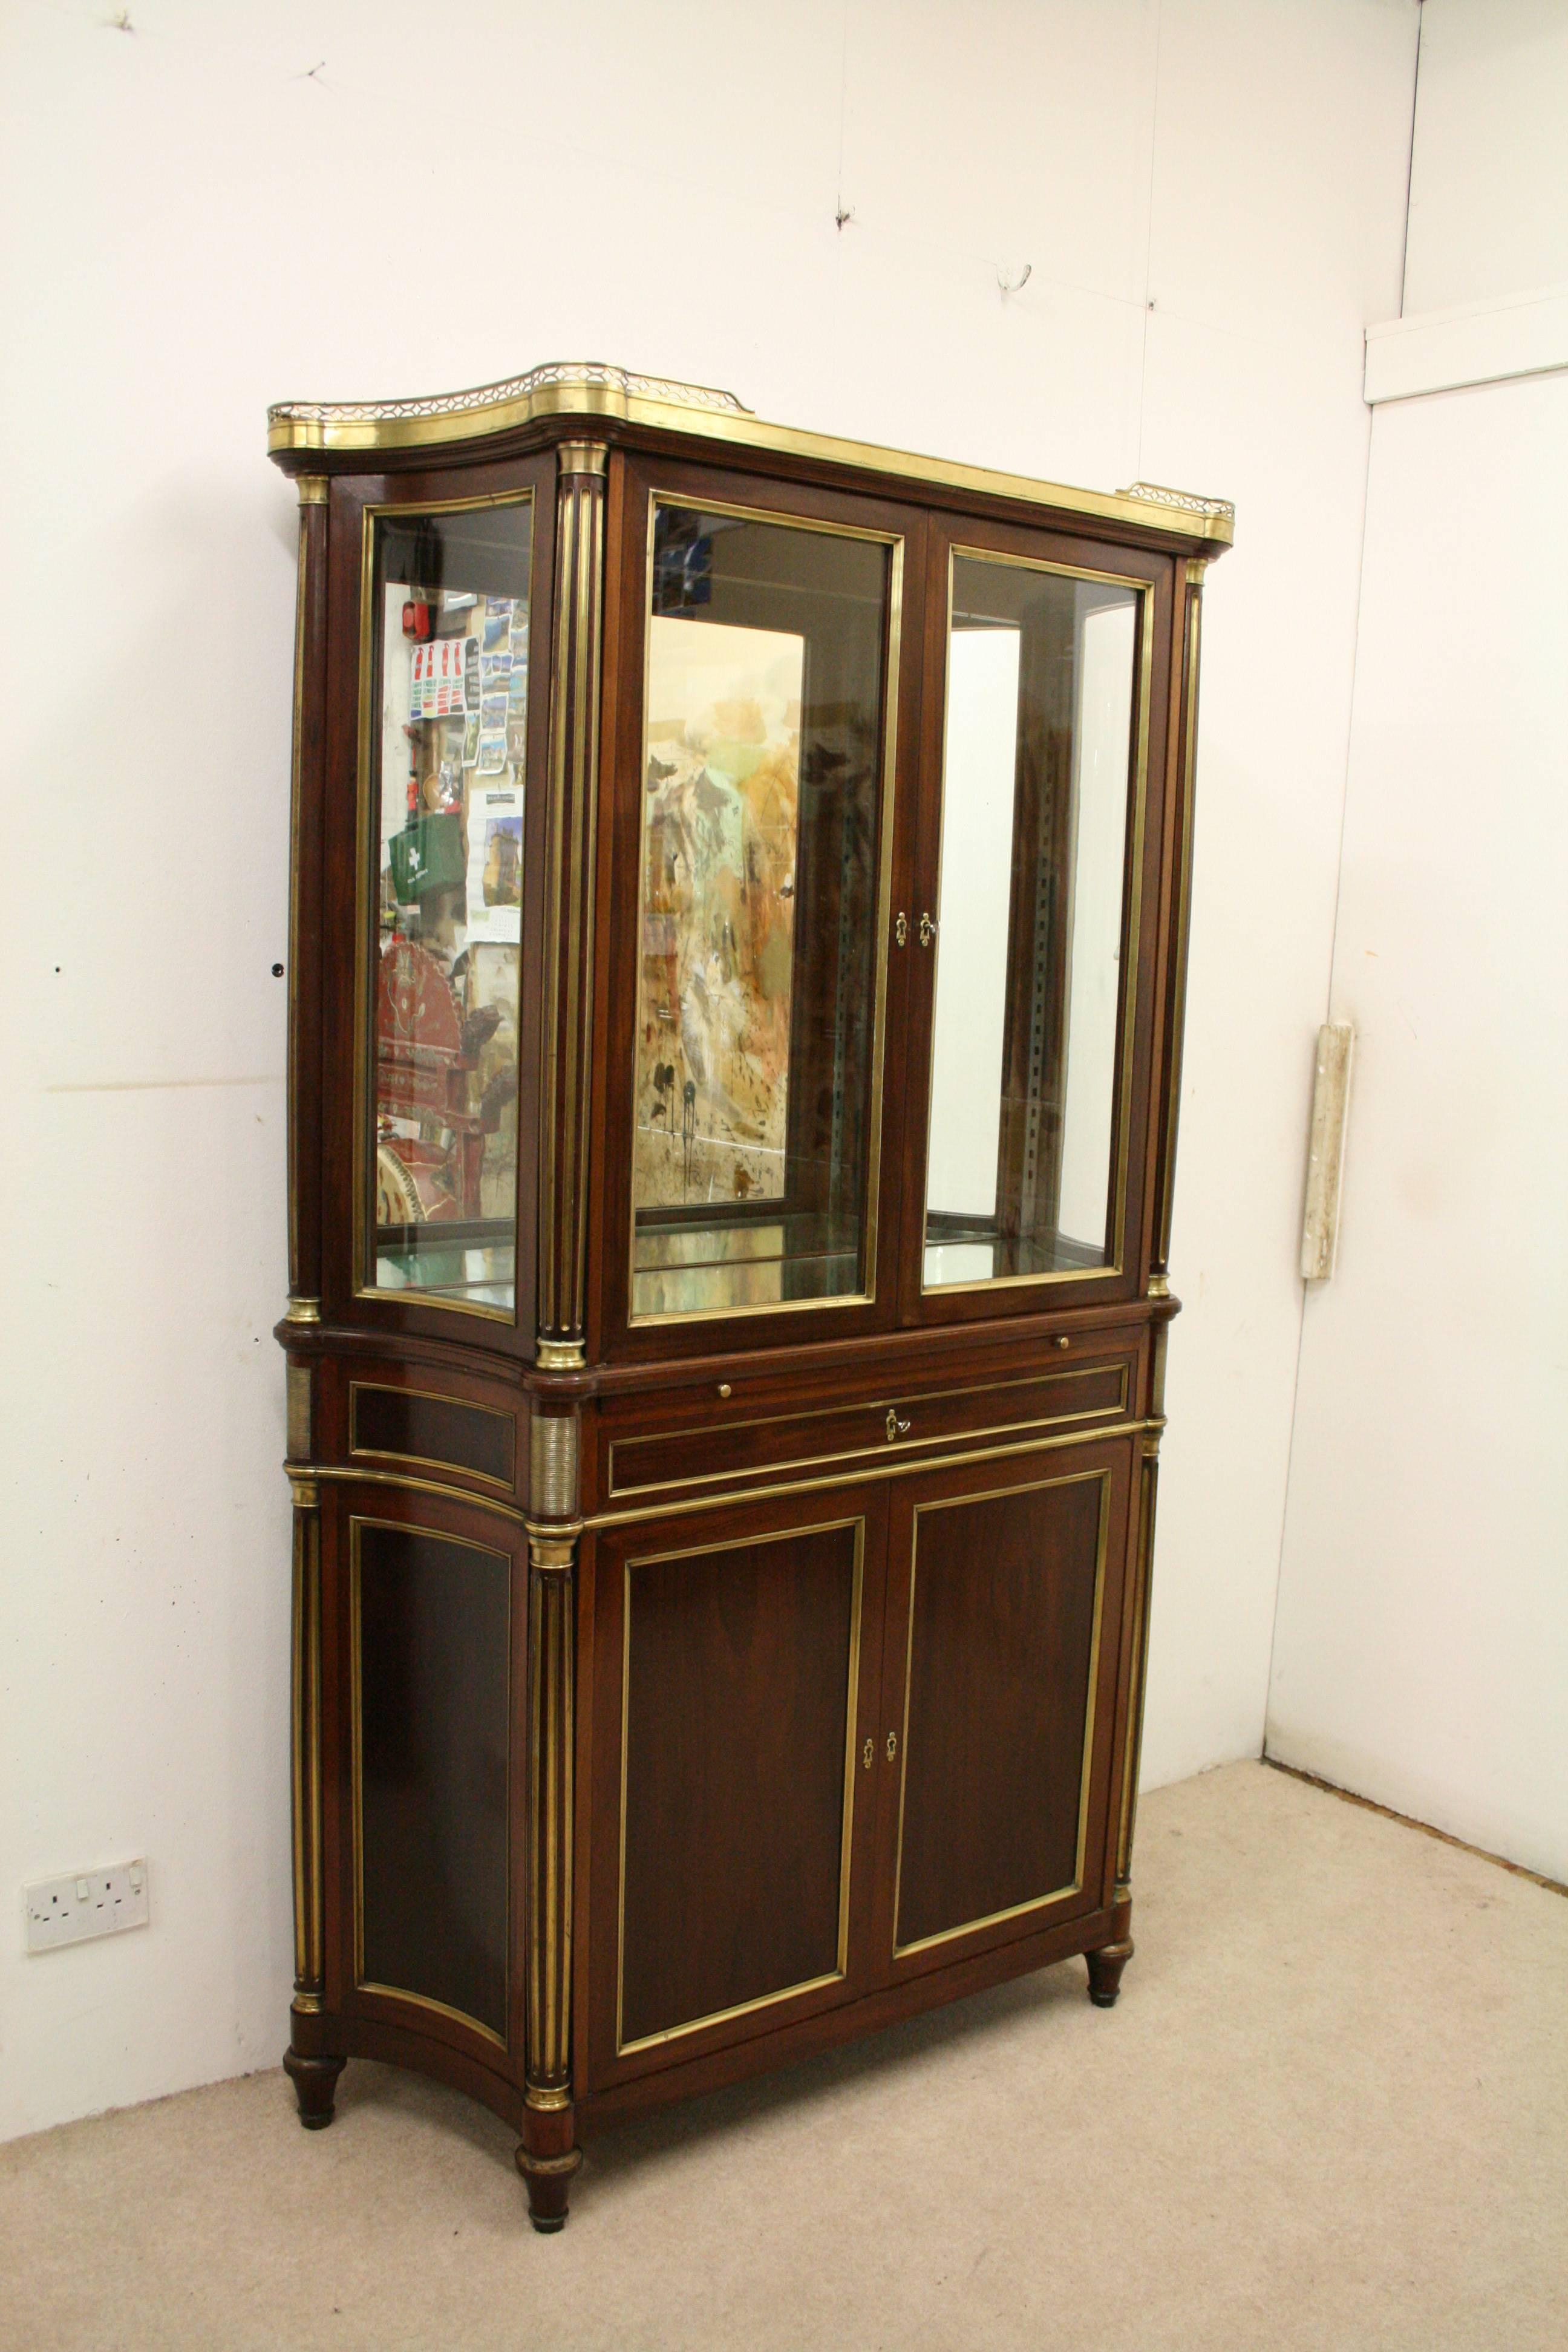 French Empire style mahogany and brass inlaid display cabinet or bookcase with a brass fretted gallery above the glazed doors and fluted brass inlaid pilasters, circa 1900. Inside there are shaped mirror shelves and a mirror back. The base section